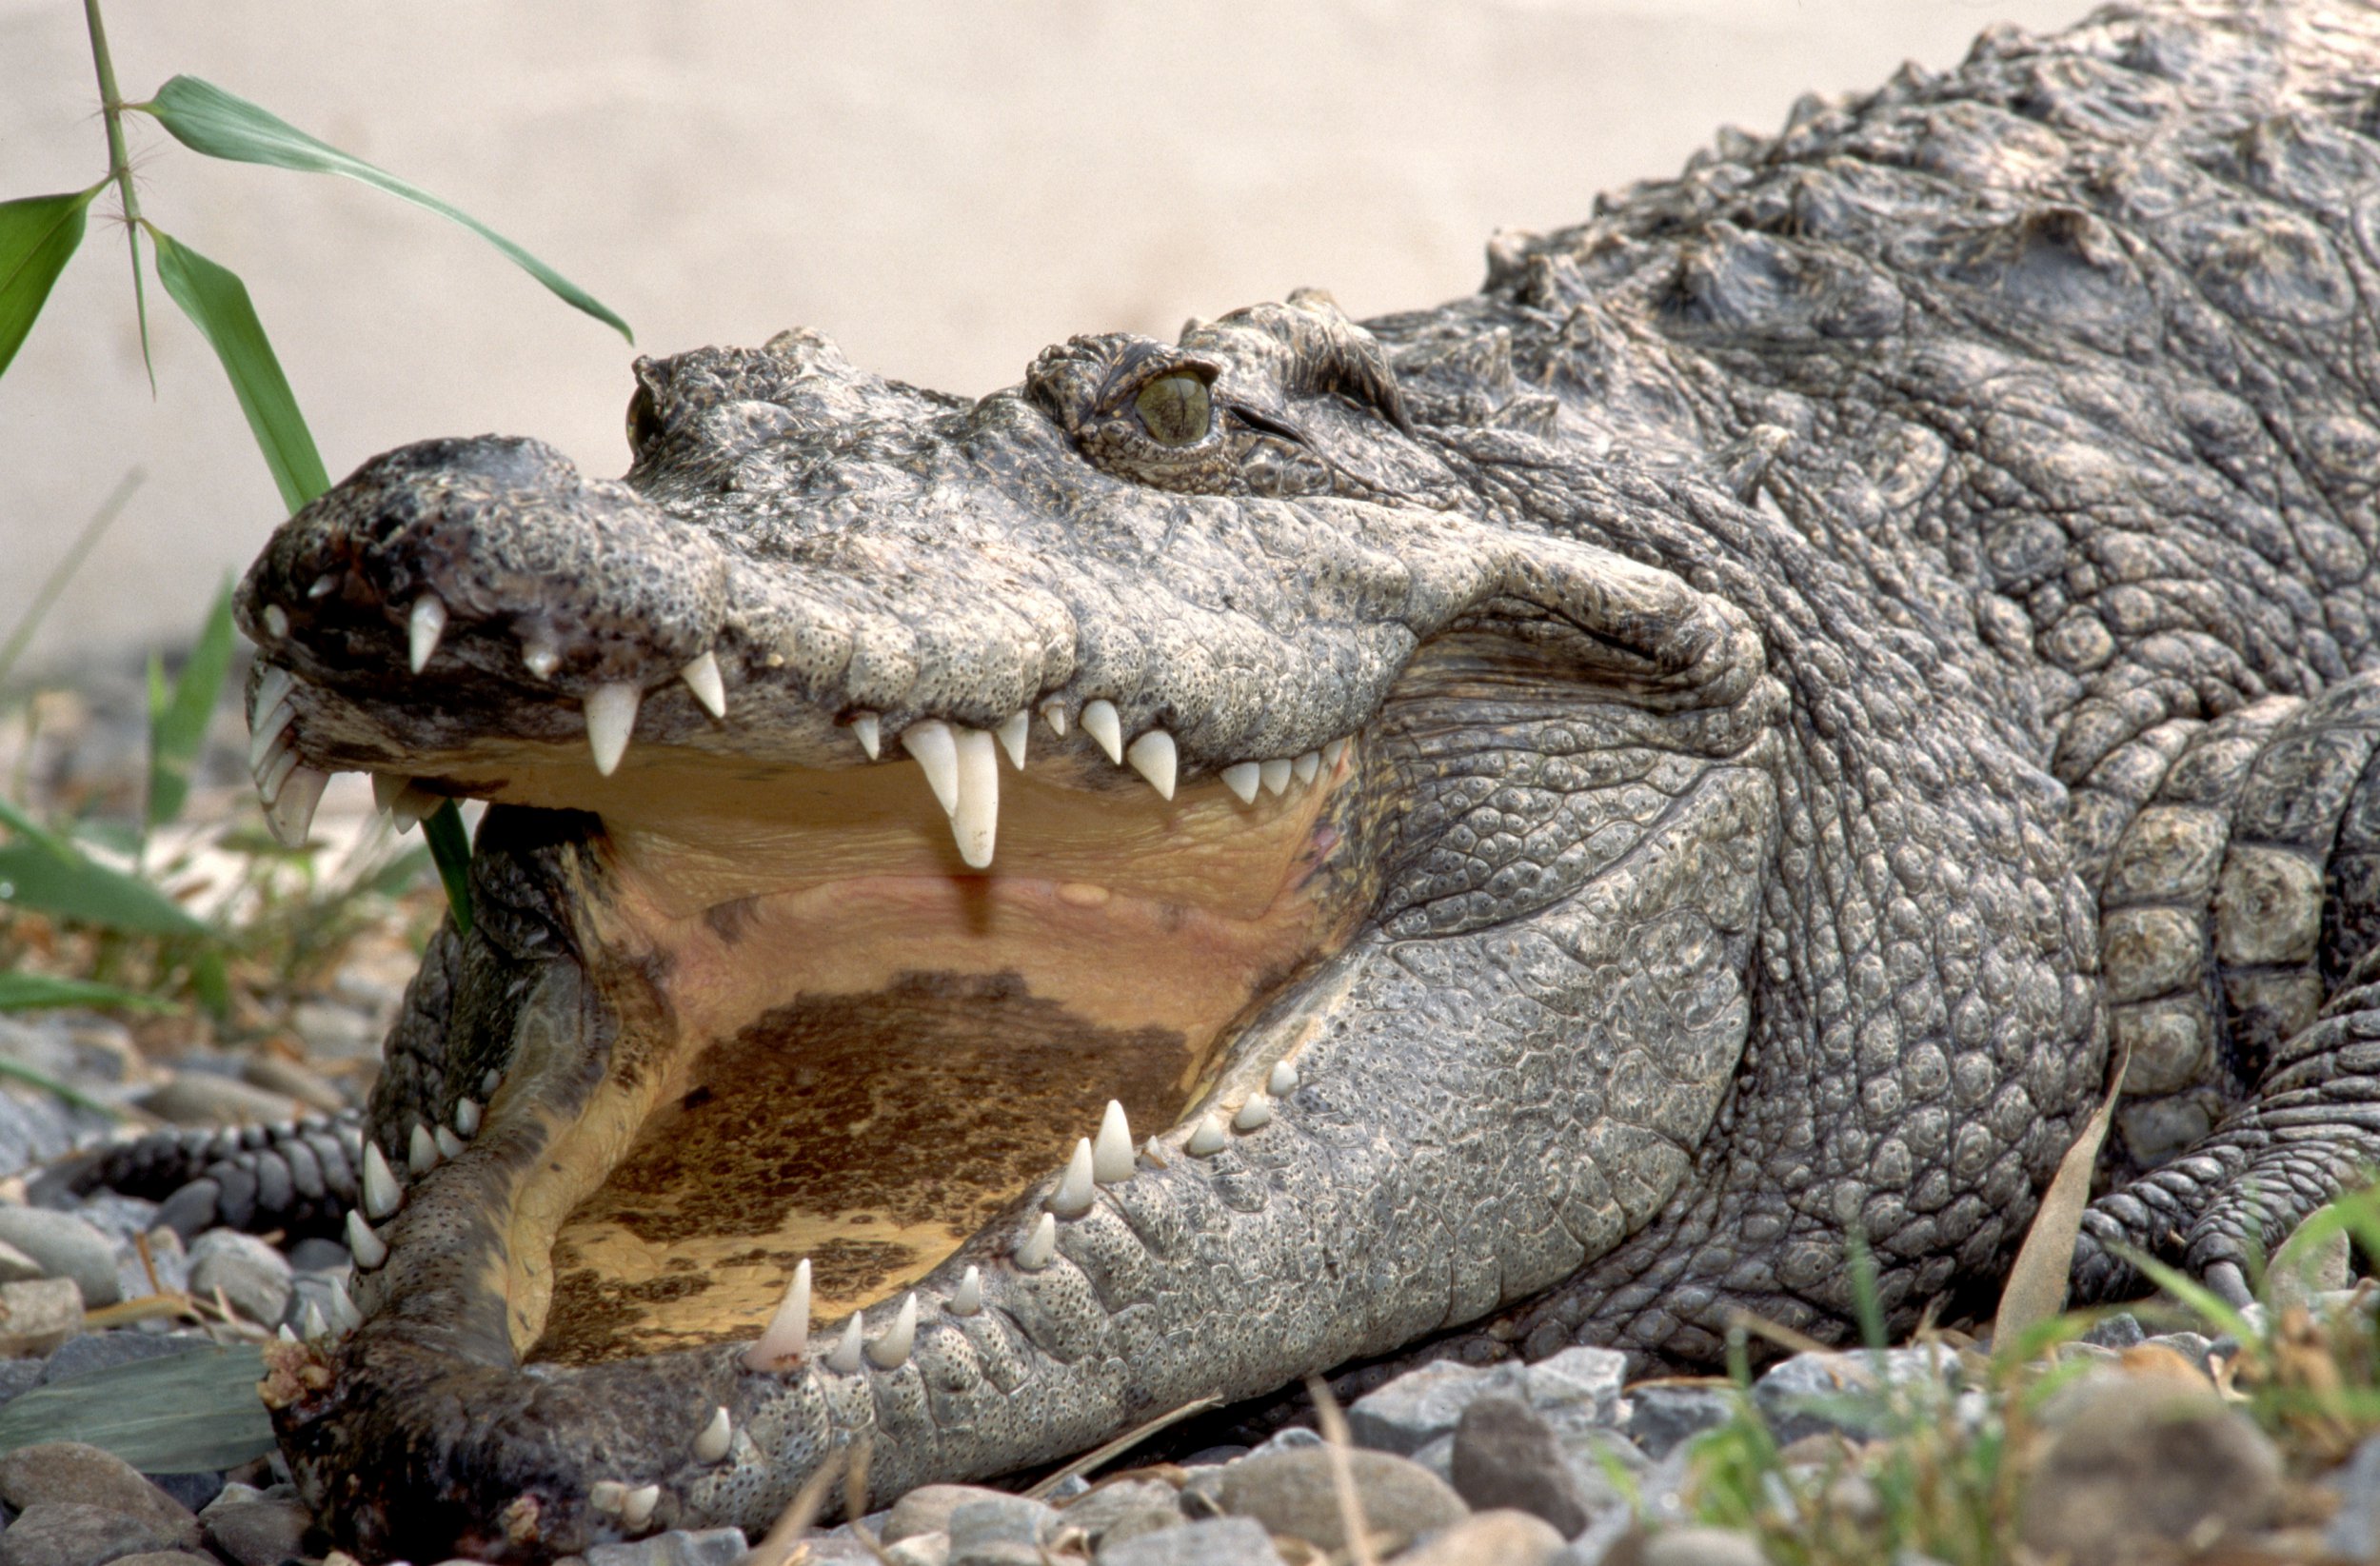 Can Crocodiles Stick Out Their Tongue